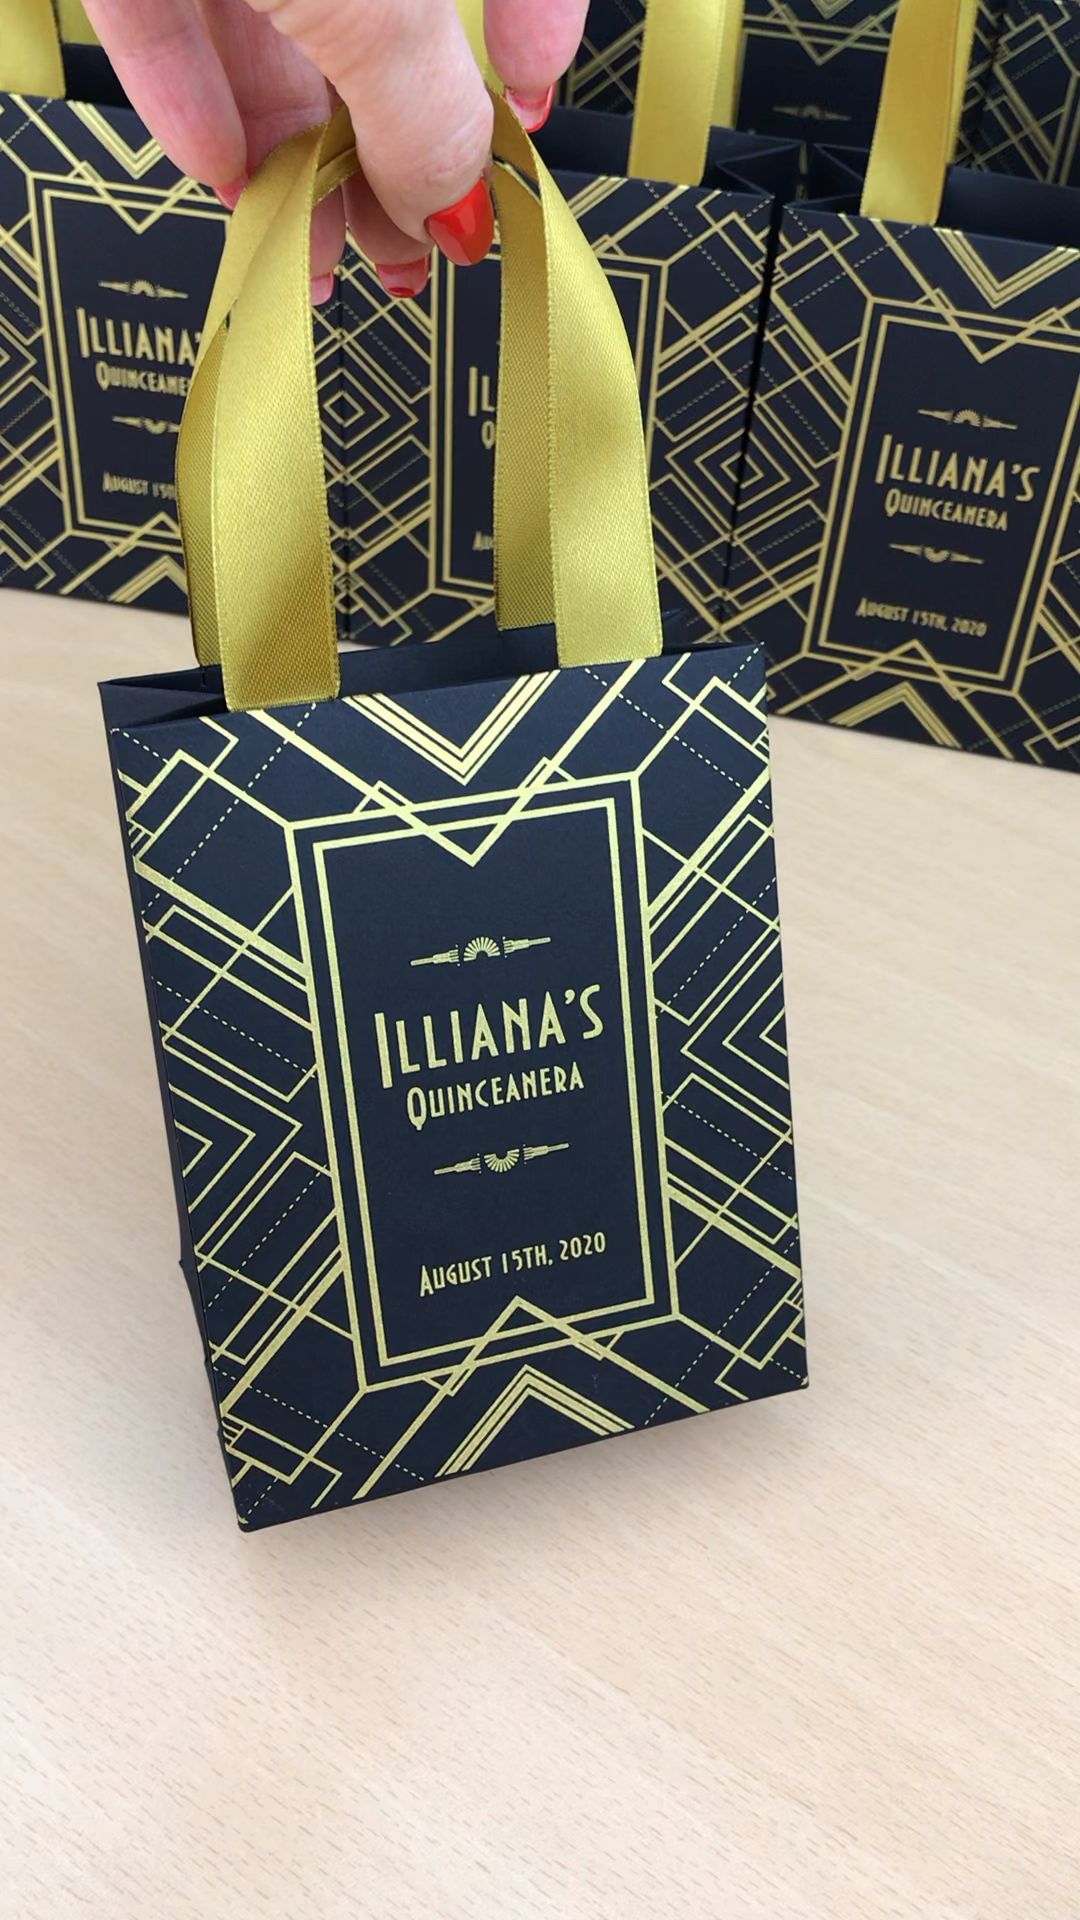 Gold party favor bags for guests -   13 Event Planning Corporate party themes ideas